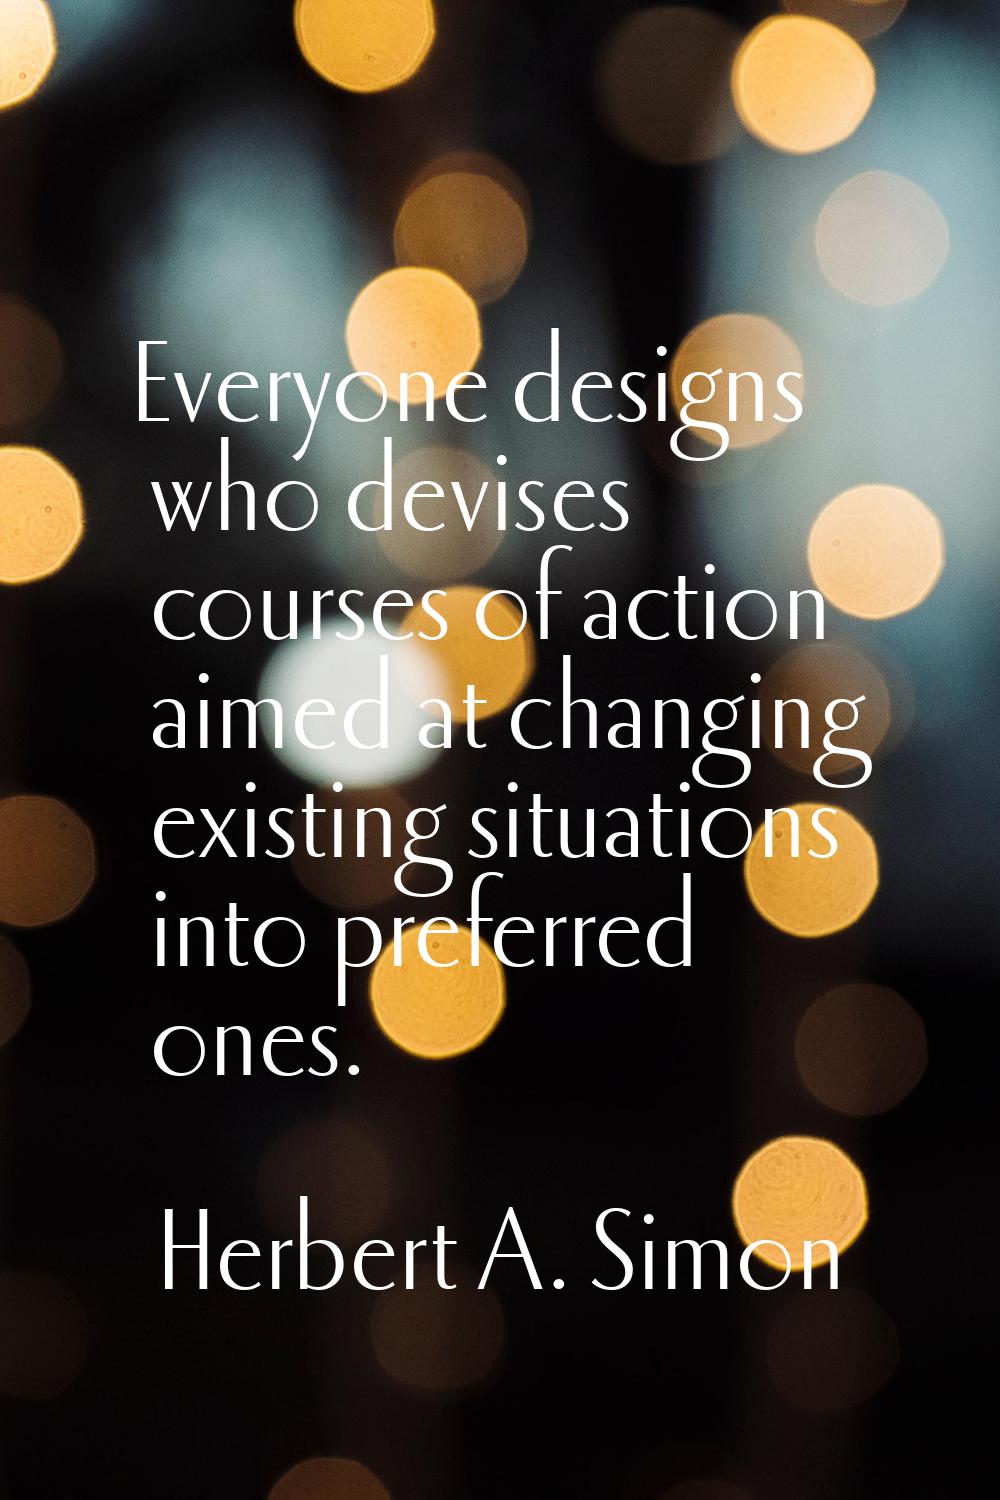 Everyone designs who devises courses of action aimed at changing existing situations into preferred